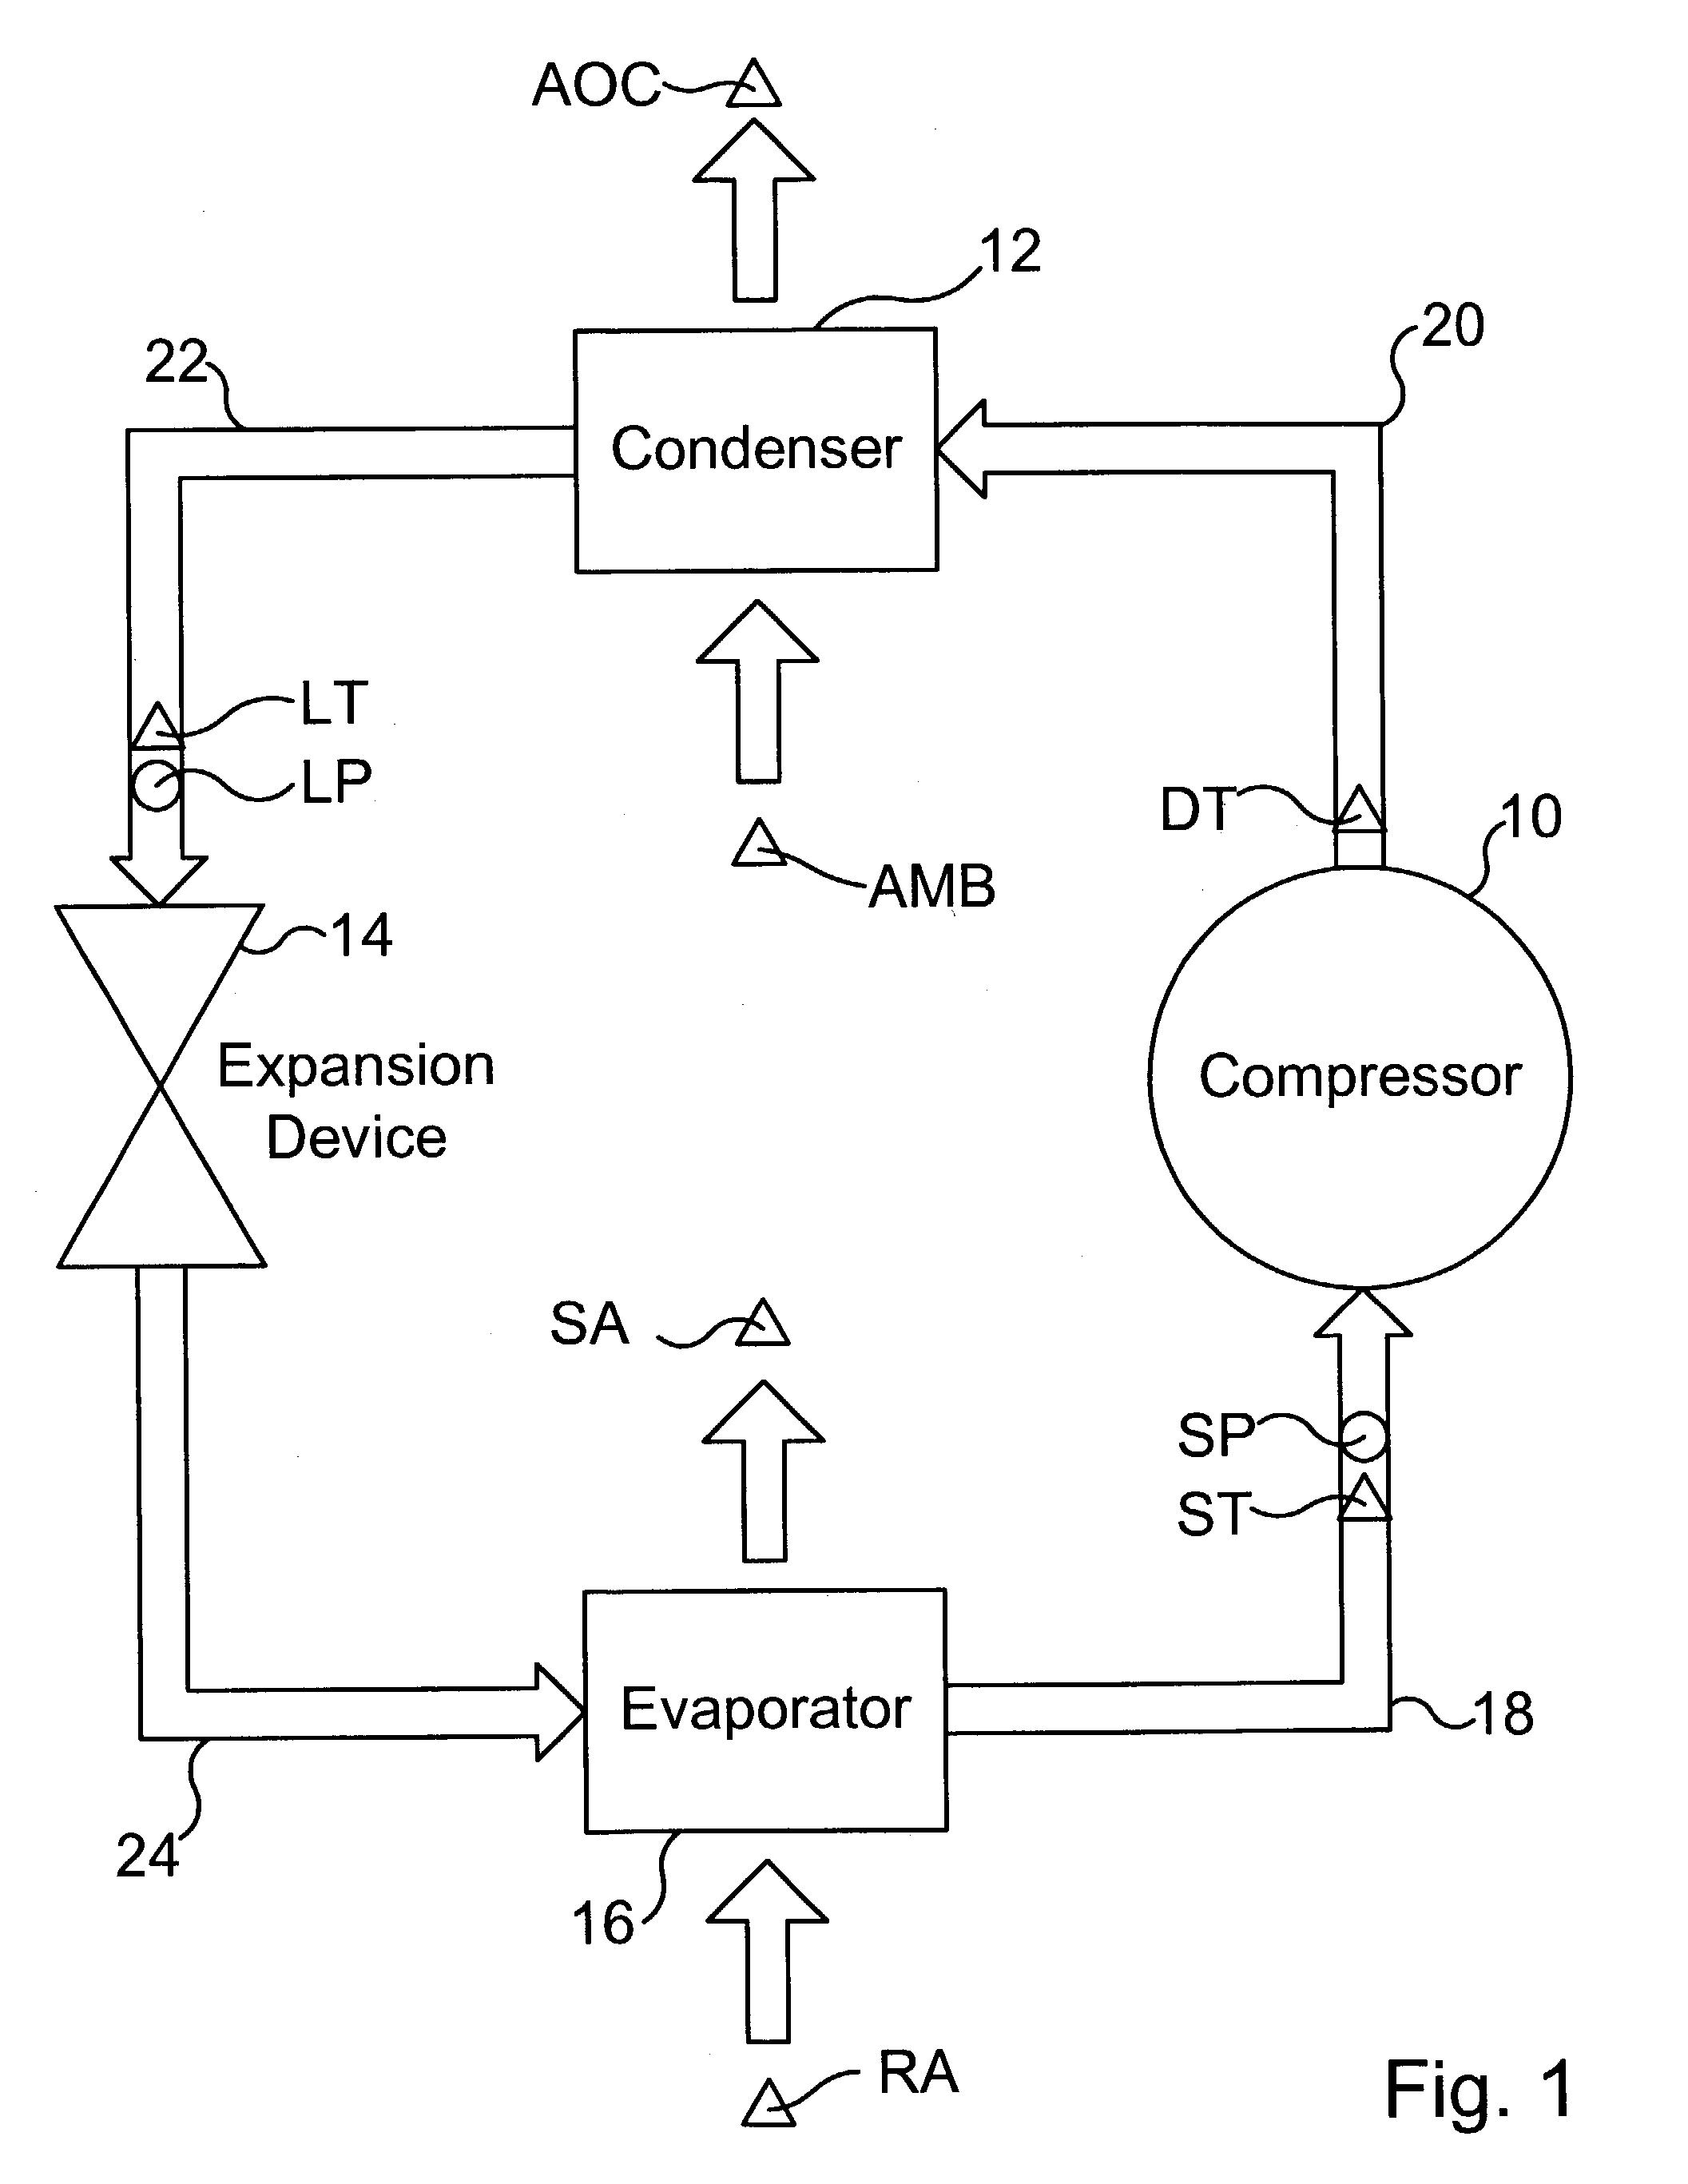 Apparatus and method for servicing vapor compression cycle equipment